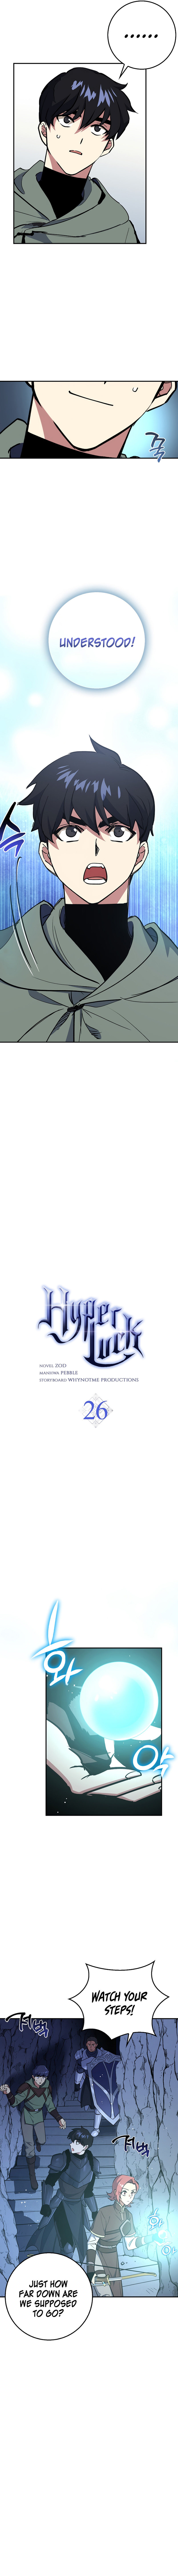 Hyper Luck Chapter 26 - Page 5